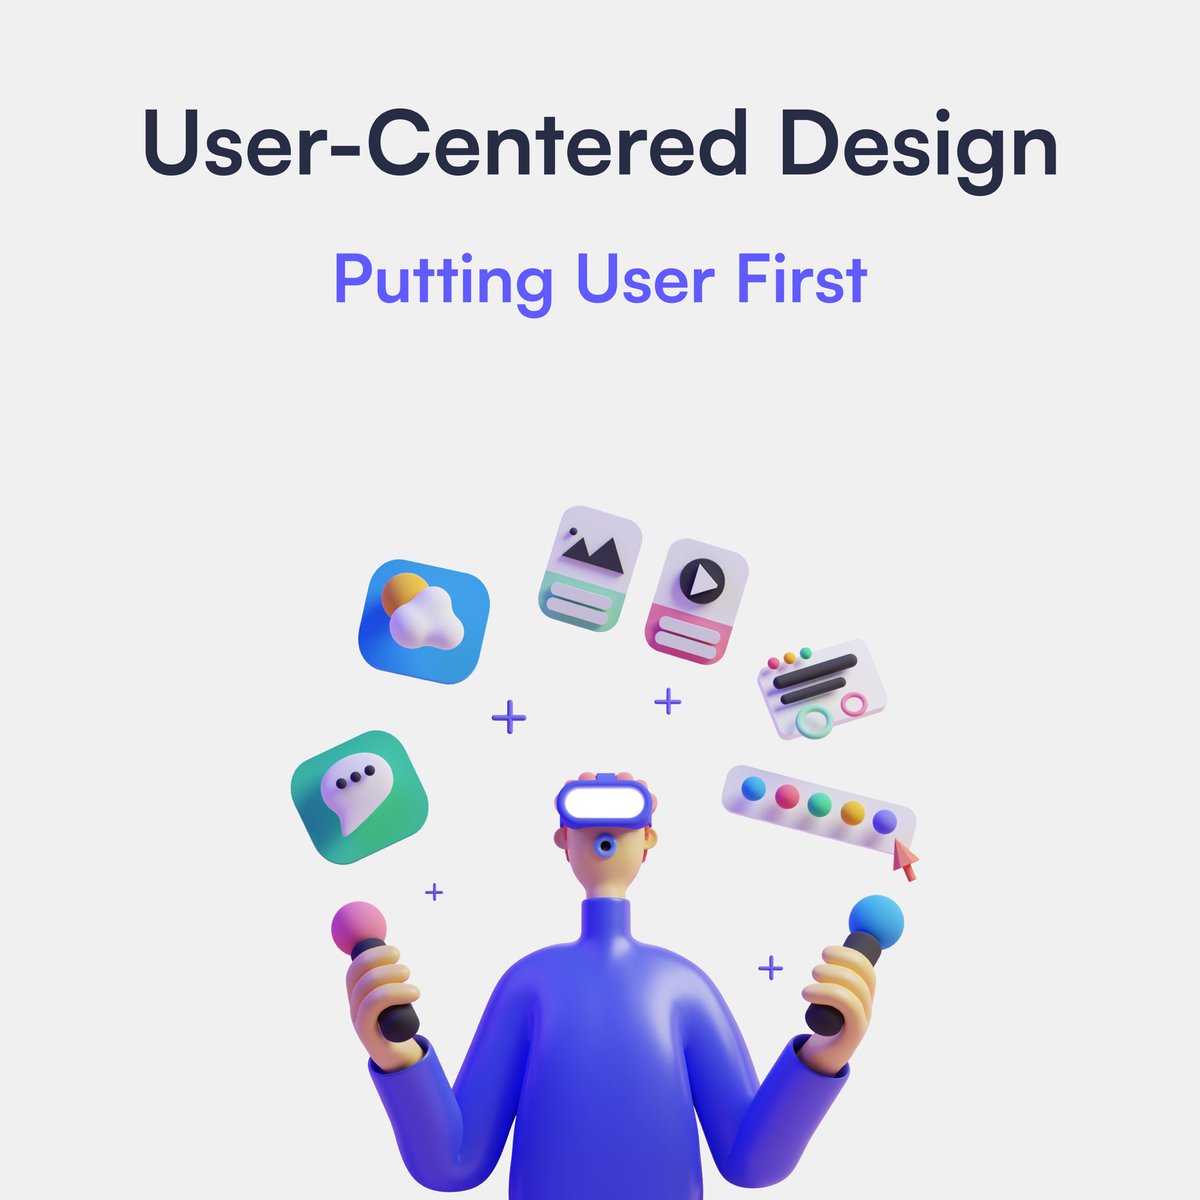 🚨 Beware the UX pitfall! Neglecting User-Centered Design could cost you BIG. But fear not, I got you. Let's dive into the world of UX transformation! 🔑 #UXAlert #DesignStrategy #BusinessGrowth #ui #Figma #uiux #uidesign #designinspiration #uxdesign #DesignTips 
Drop a follow ✨